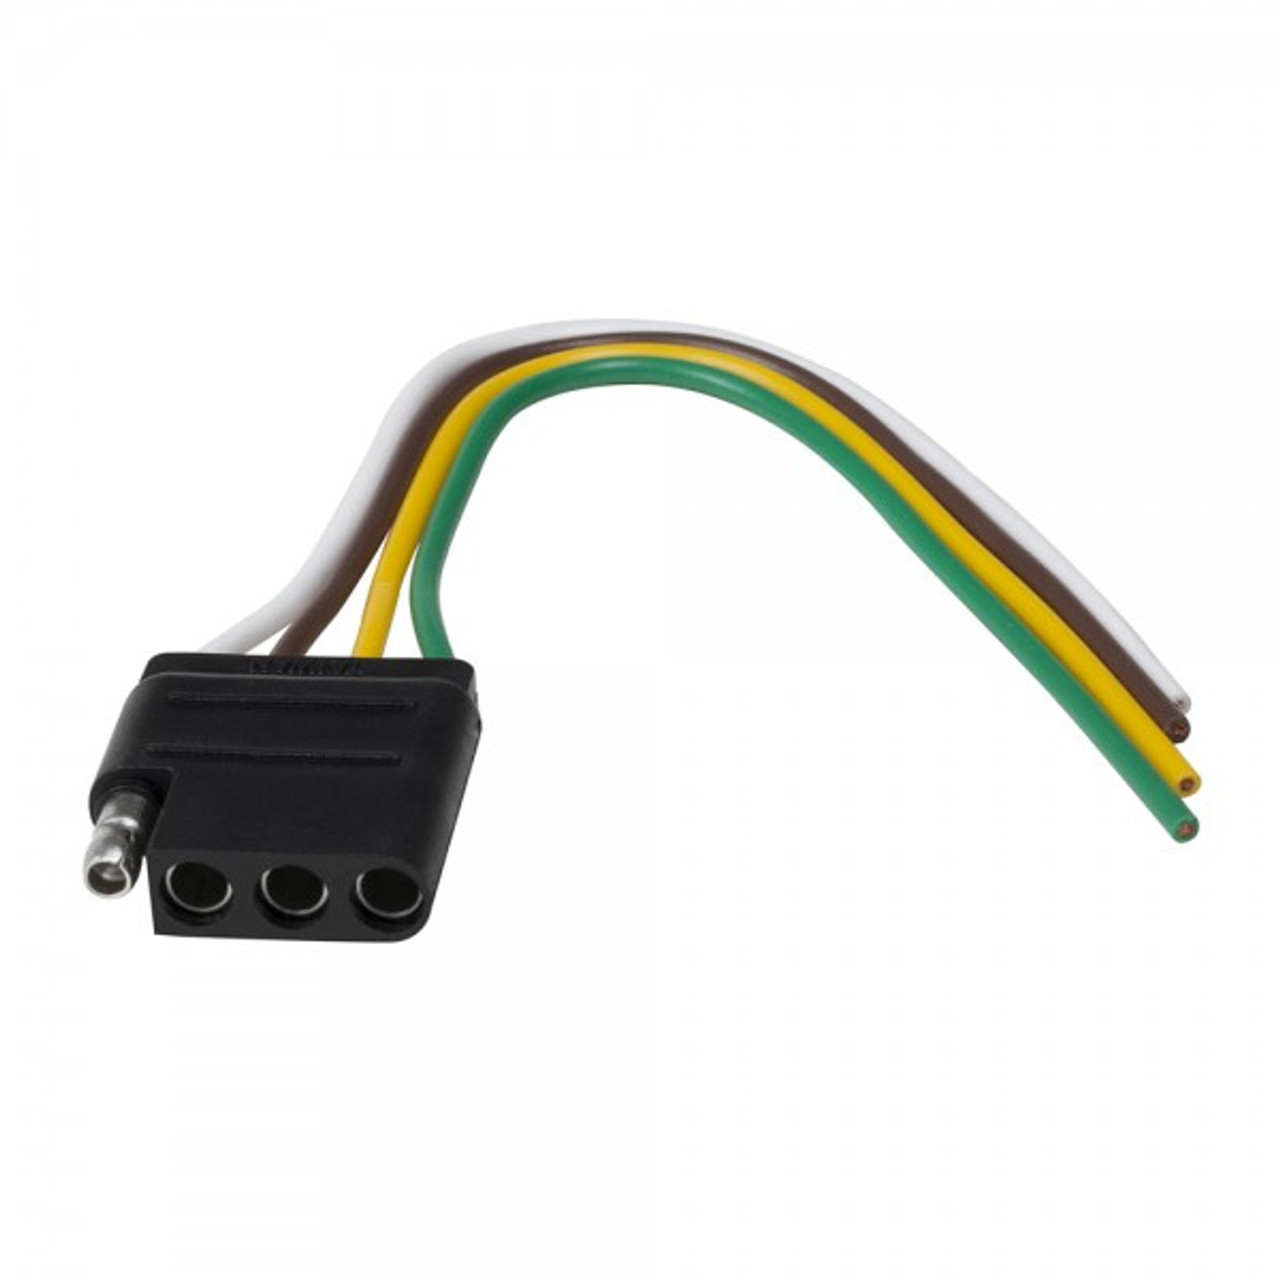 16 AWG @ 6" Flat 4 Pin Trailer Connector - Brown/Green/White/Yellow  82-1031